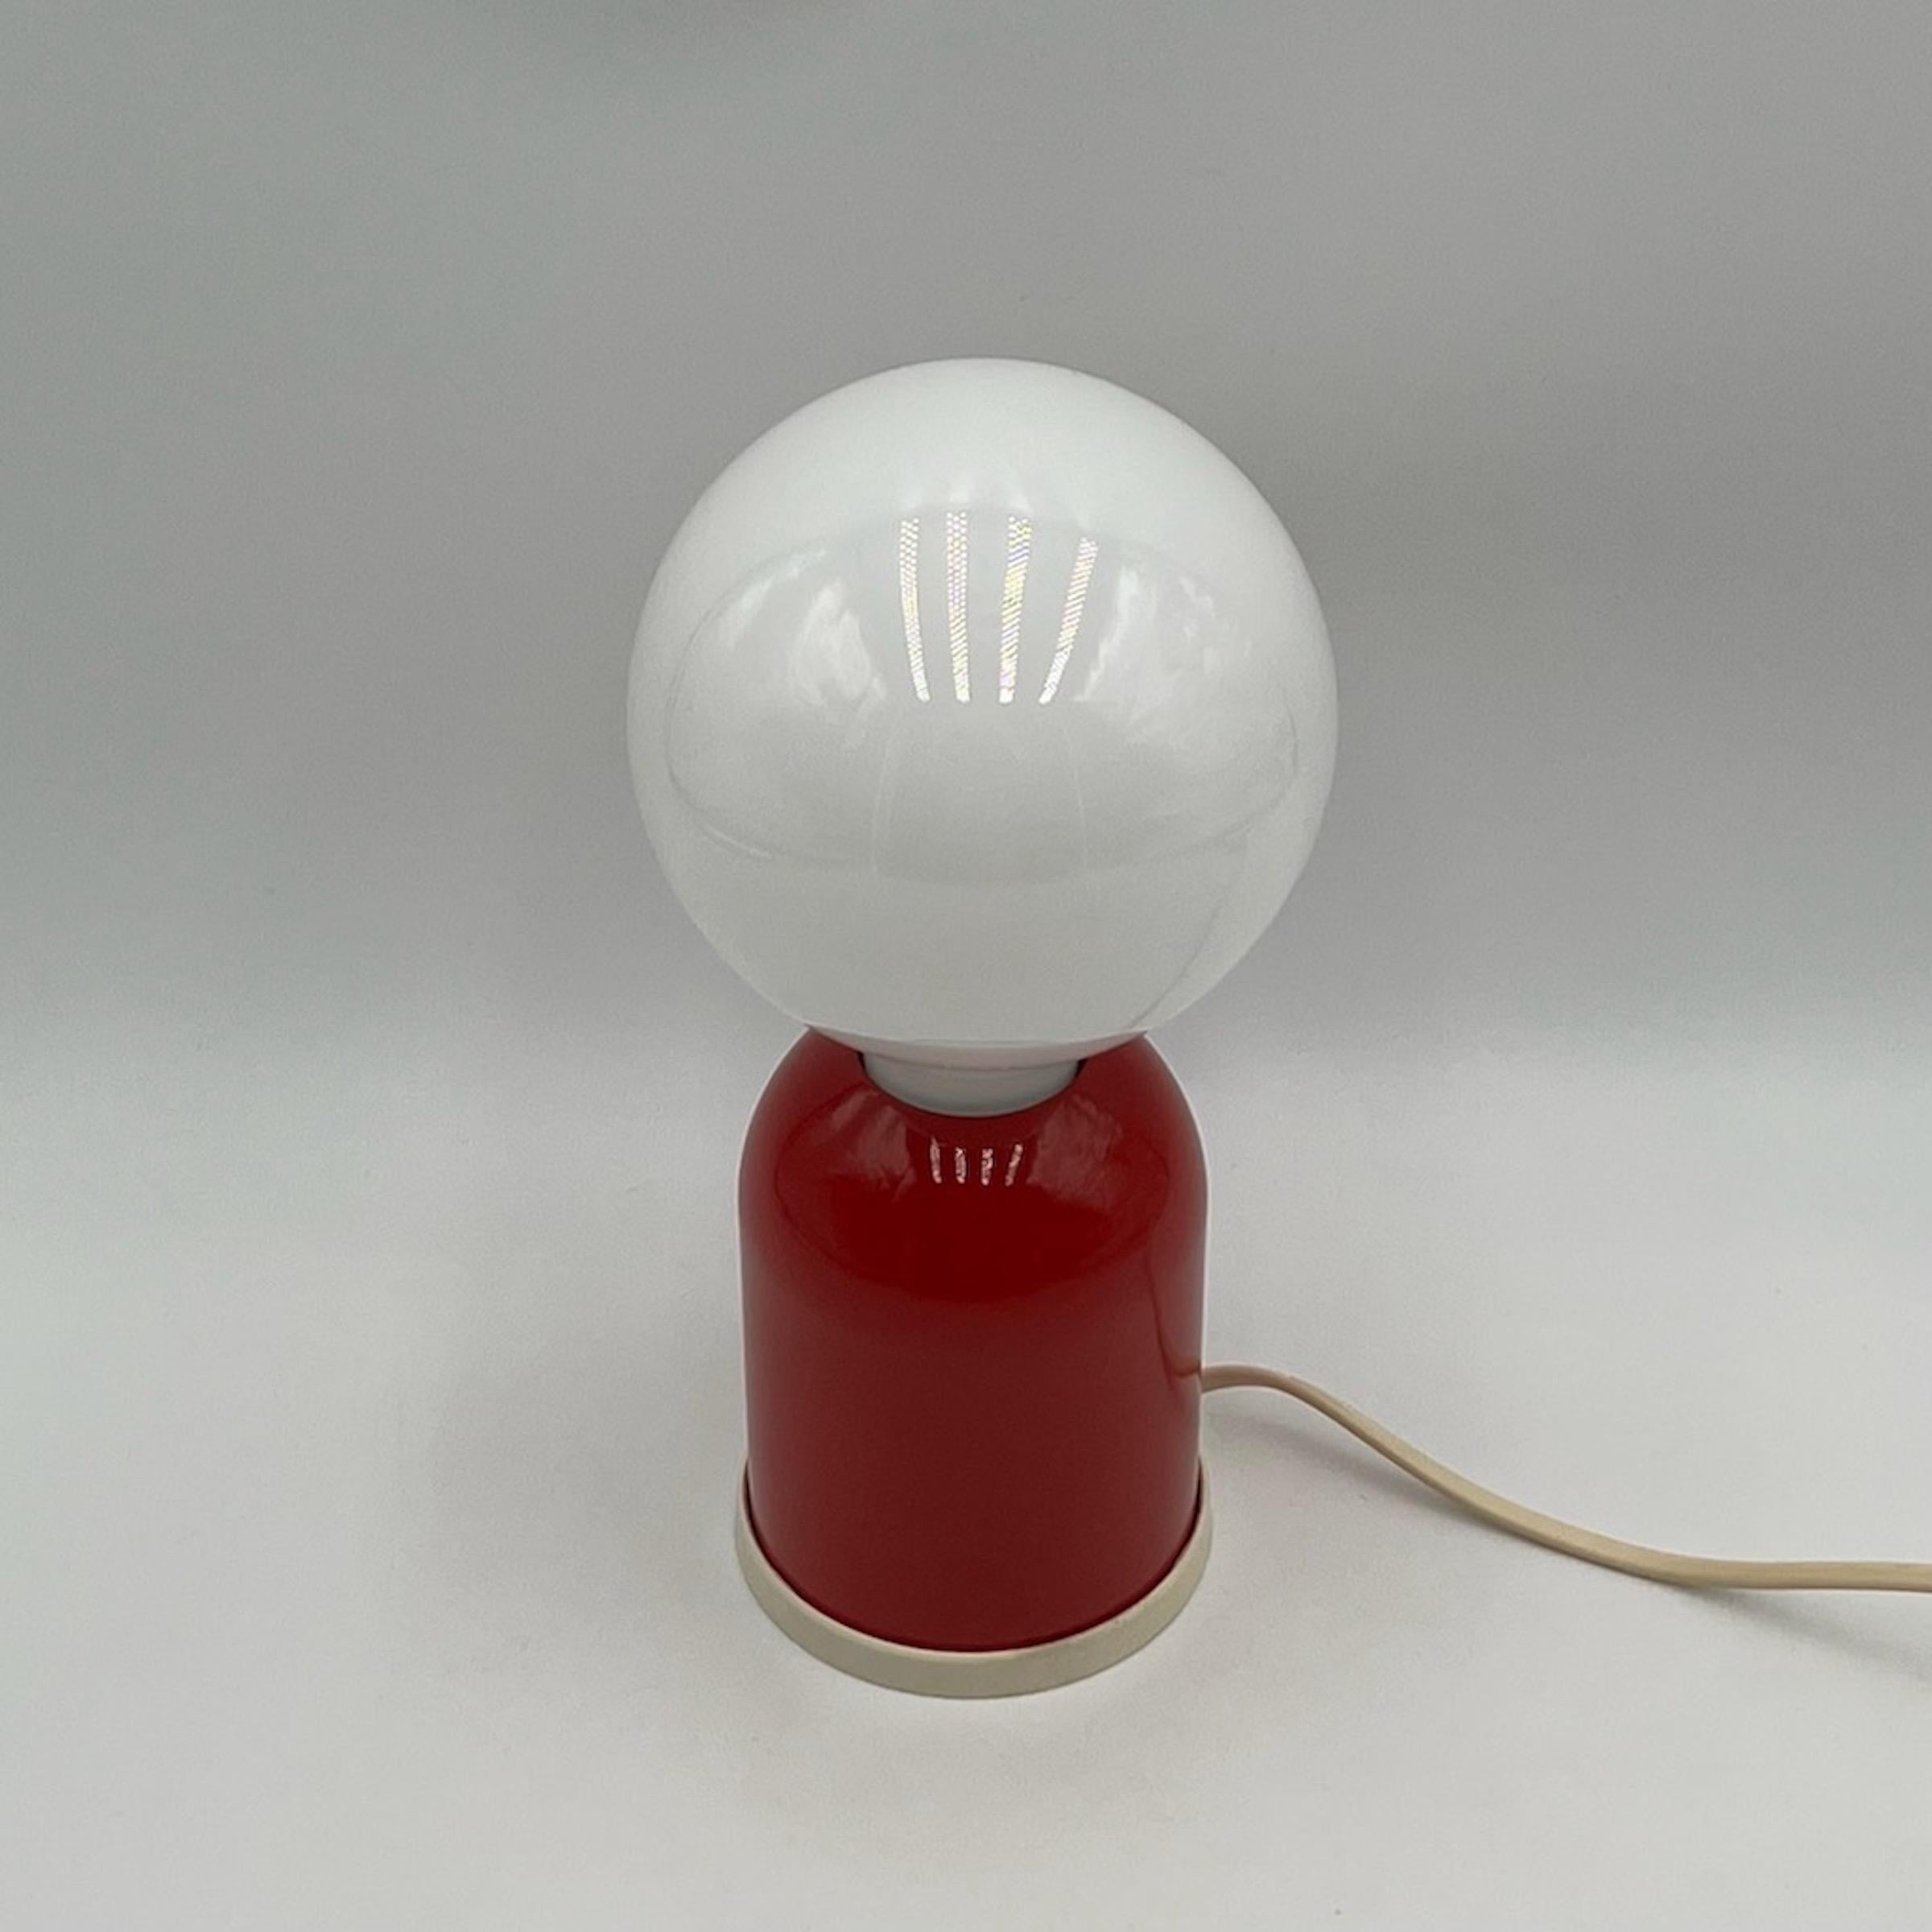 Minimalistic Table Lamp in Lacquered Red Metal by Targetti Sankey, 1980s For Sale 2